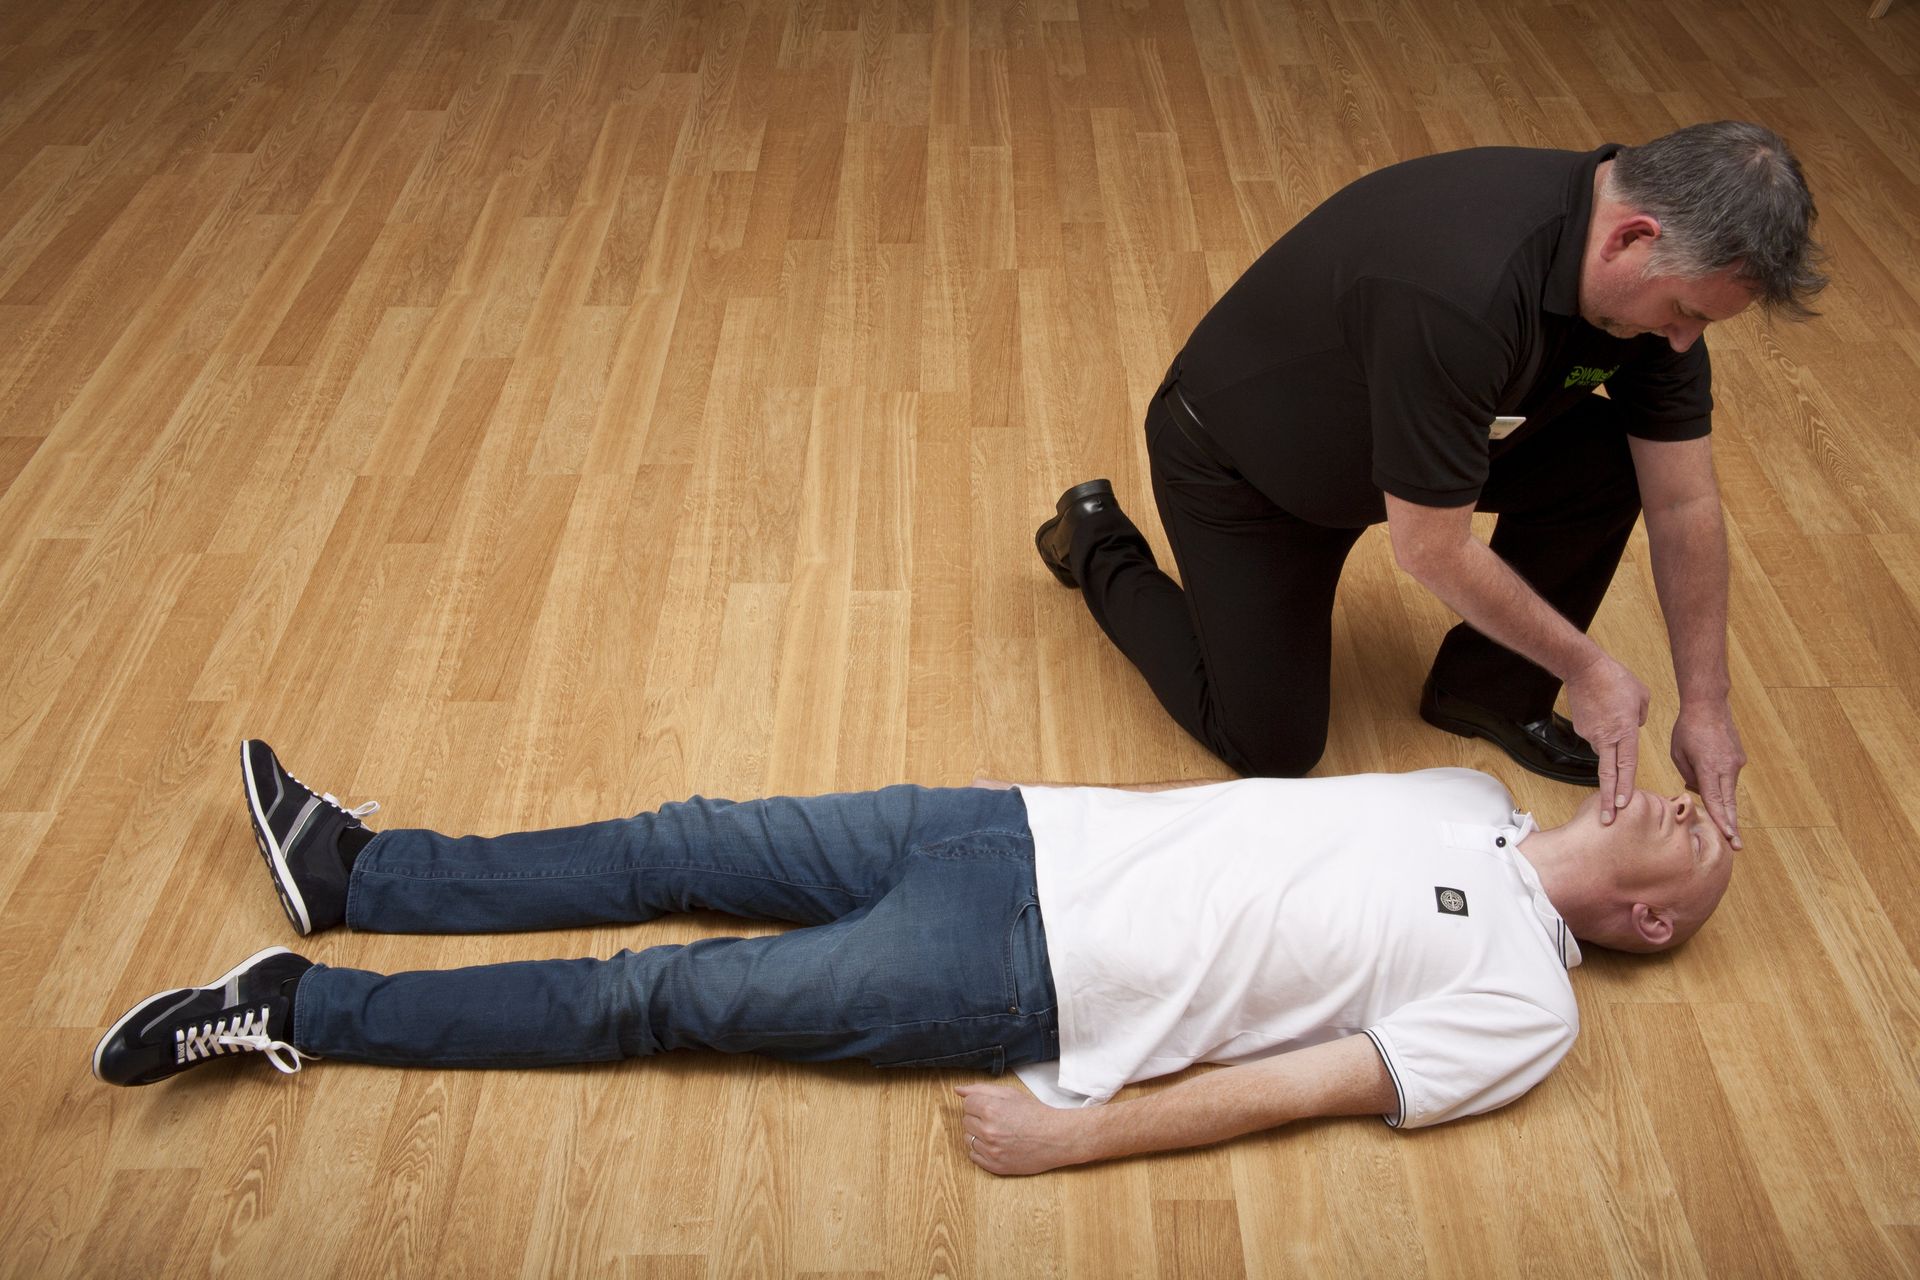 Providers of Care Home Basic Life Support Training